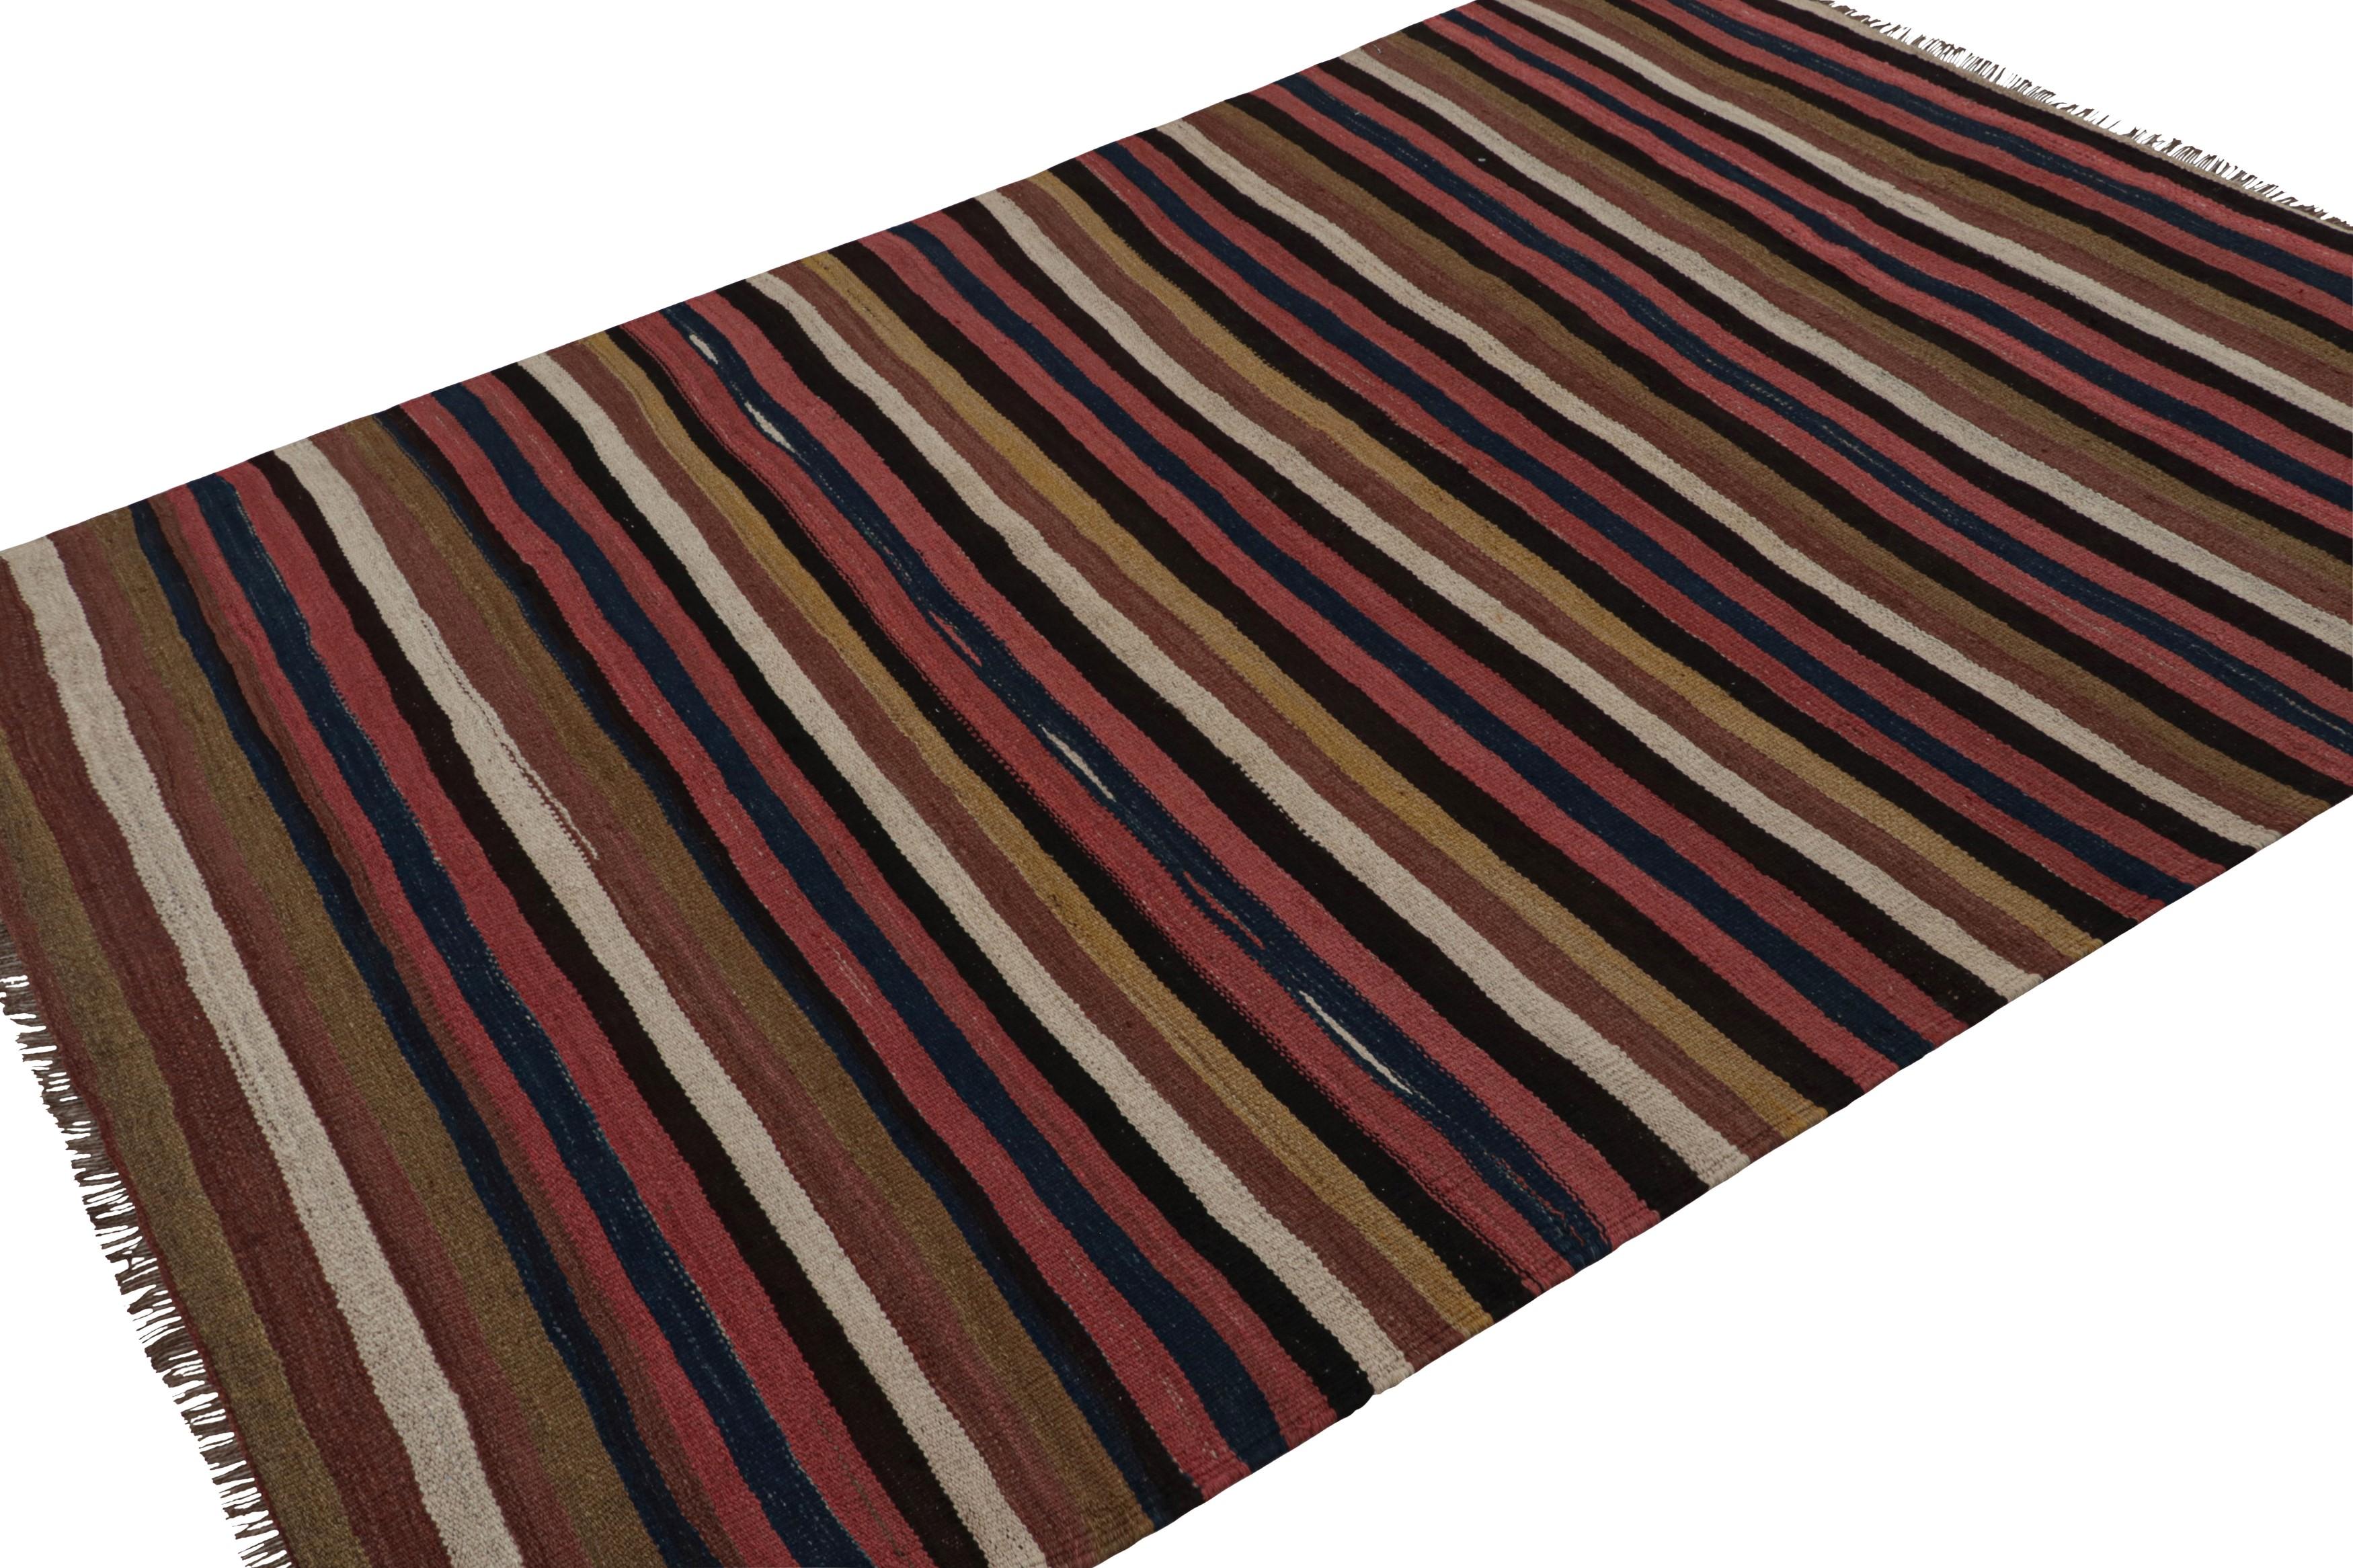 Handwoven in wool, circa 1950-1960, this 6x8 vintage Afghan tribal kilim rug, with stripes in red, silver/gray, beige/brown, and blue, is from Afghanistan. 

On the design: 

Connoisseurs will appreciate this kilim featuring the signature design of